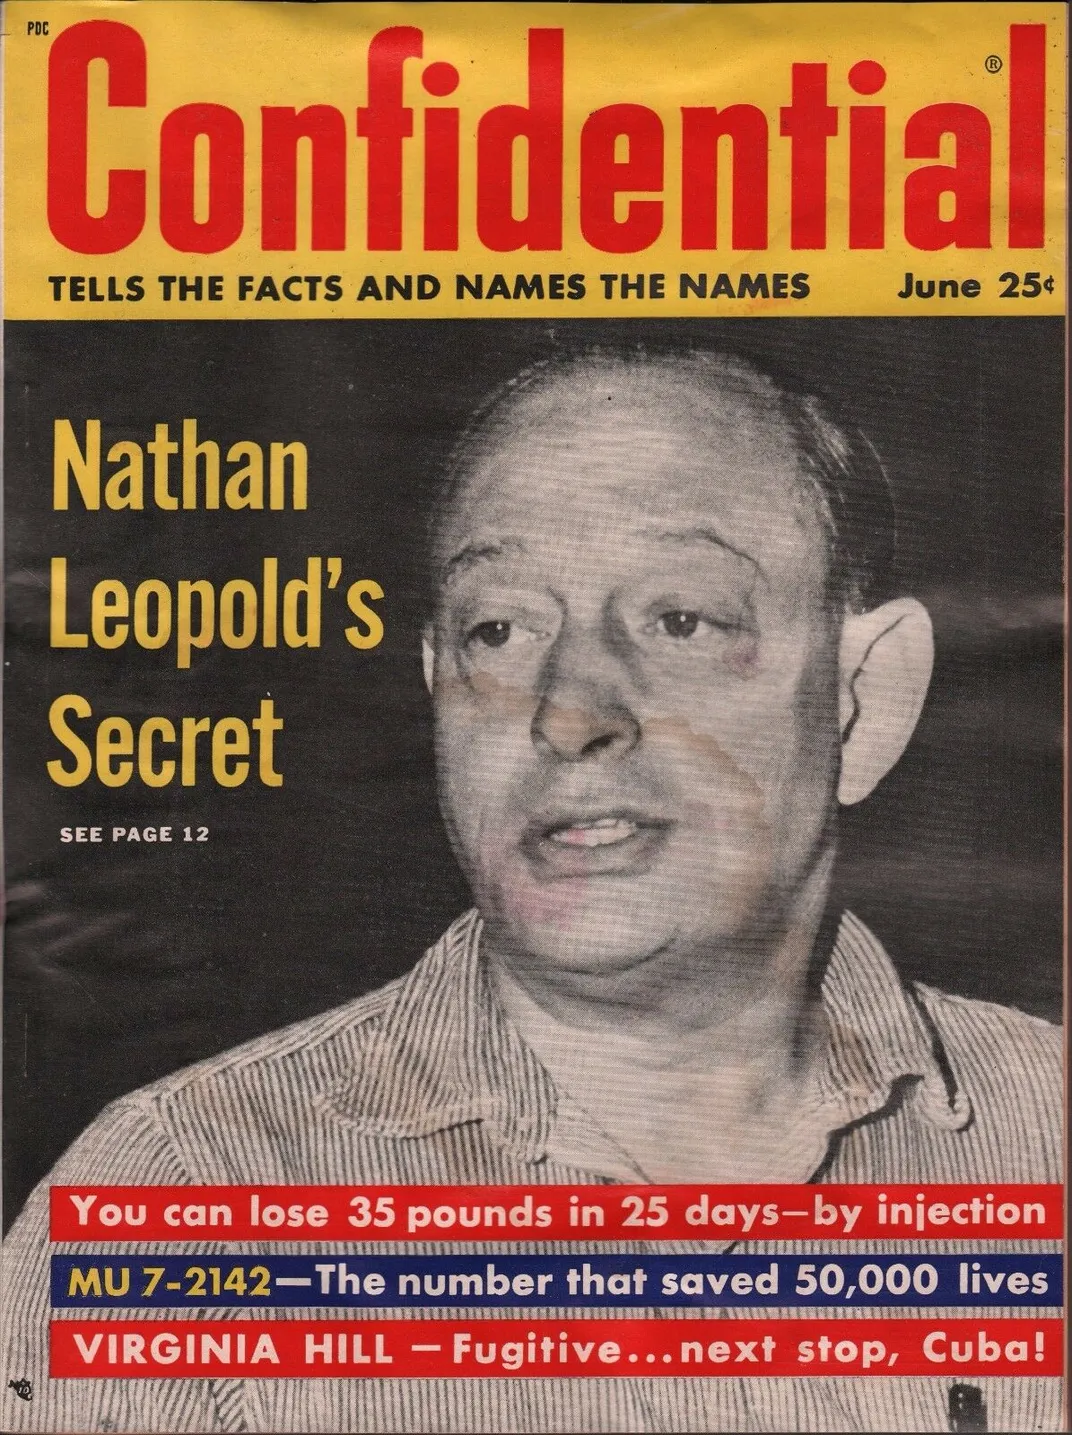 A 1958 magazine cover featuring Leopold